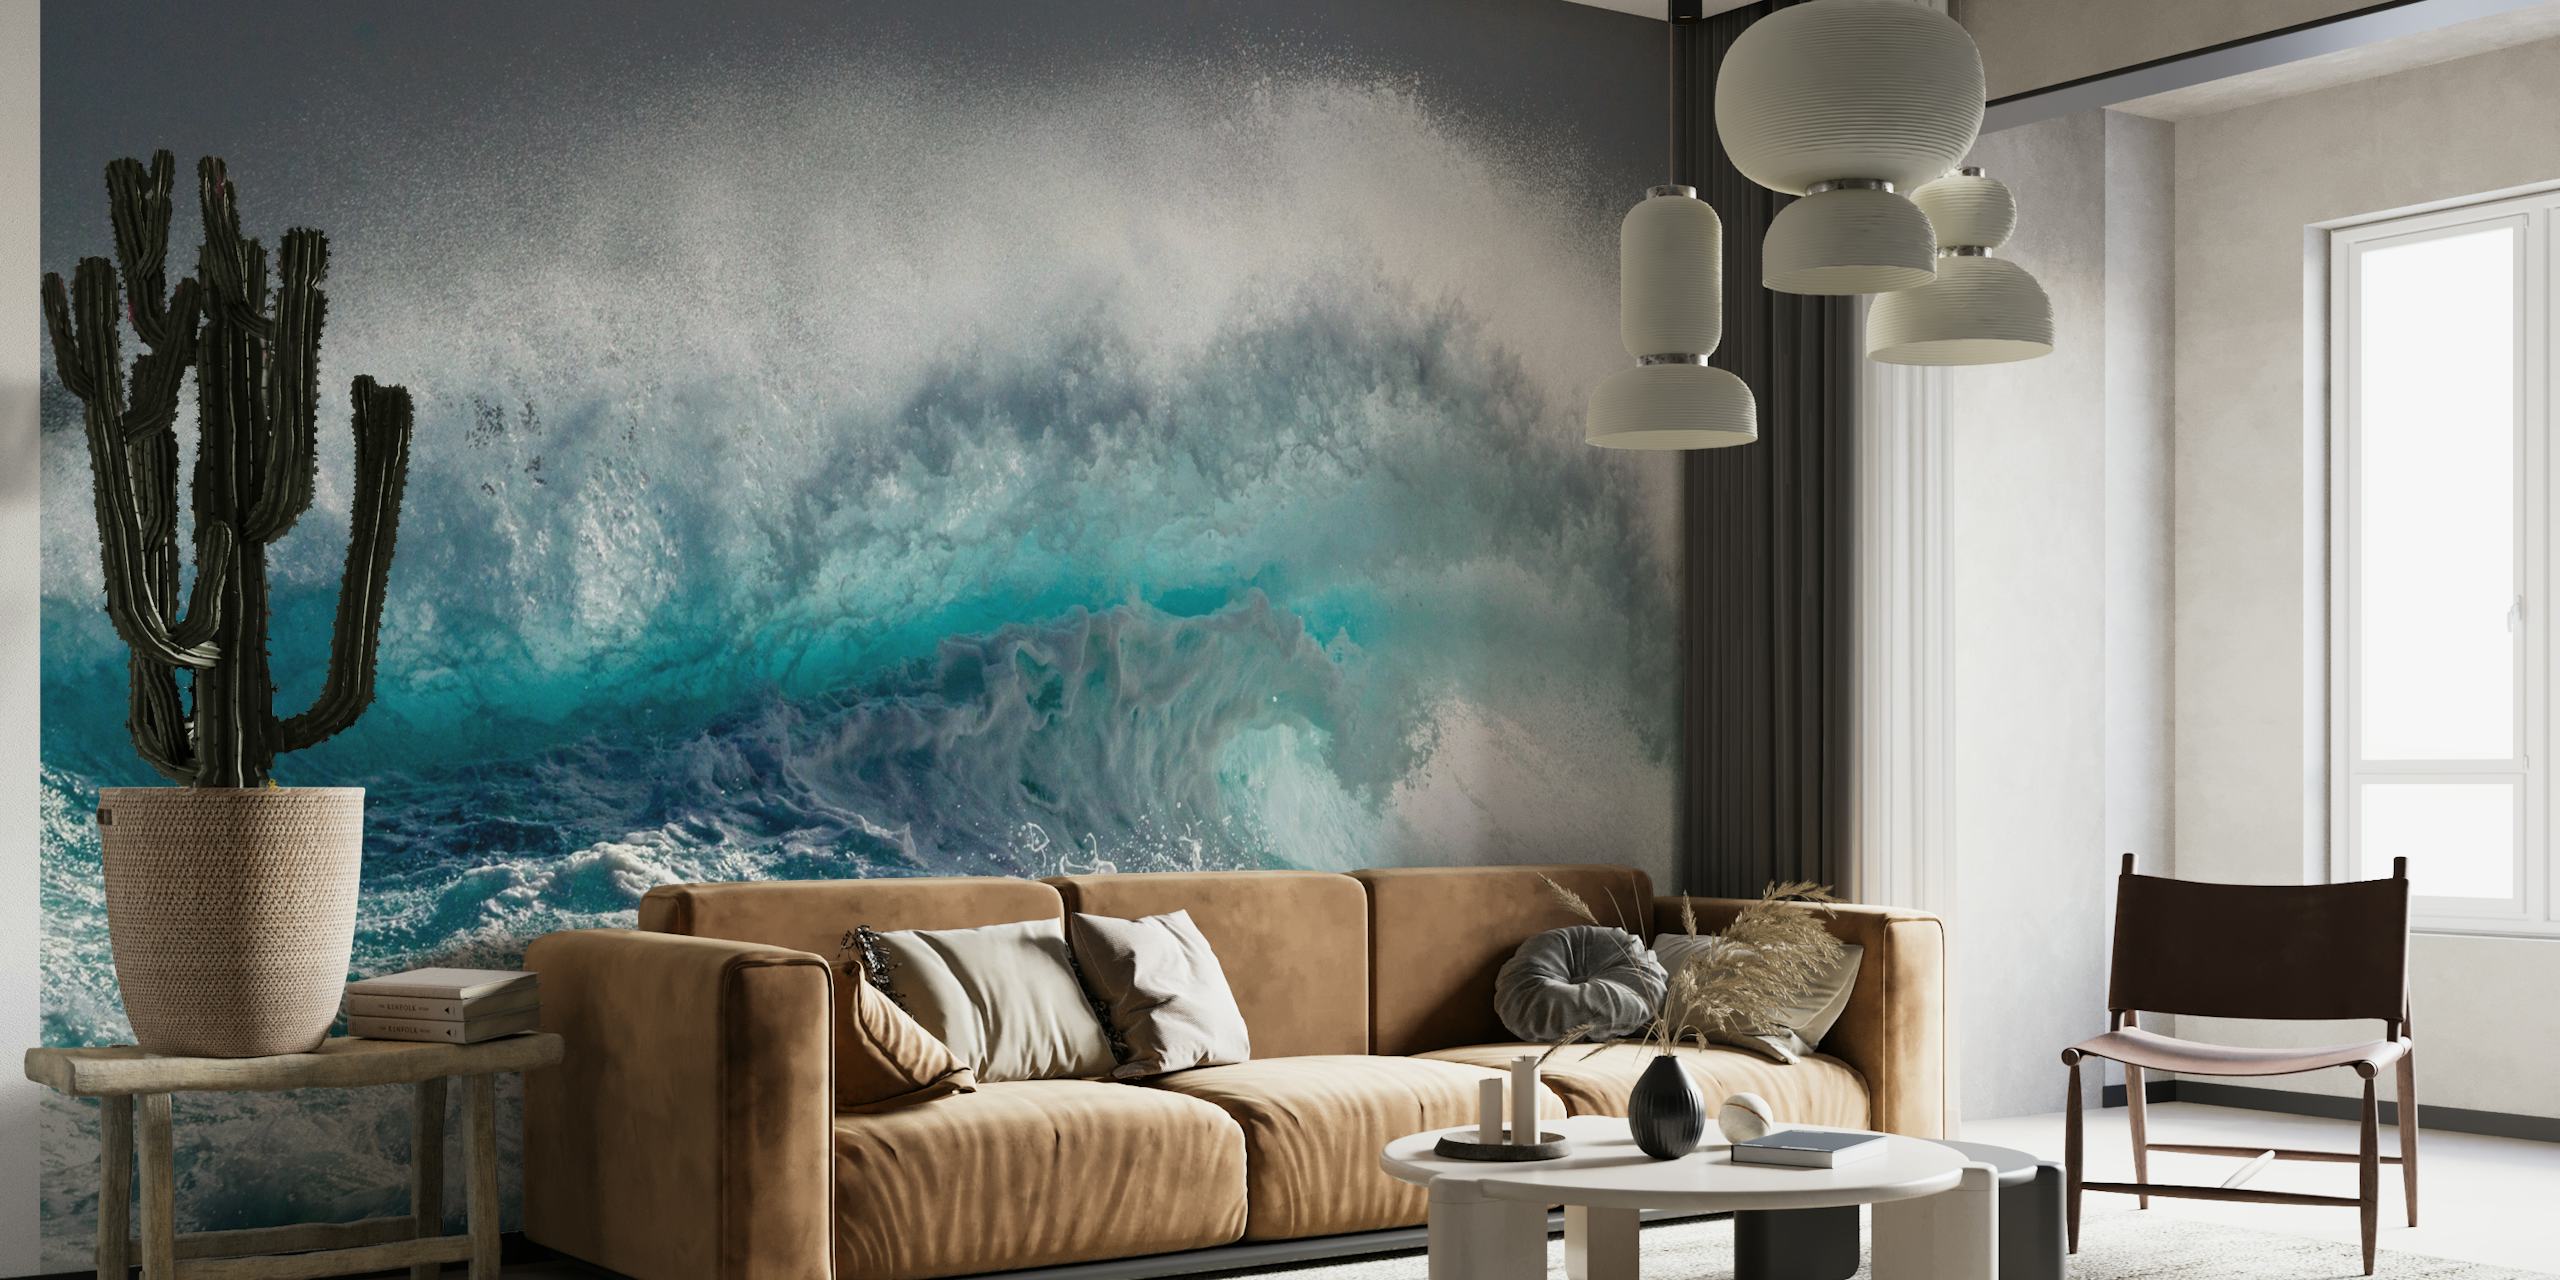 Mighty Water wall mural depicting an awe-inspiring wave in rich shades of blue and white